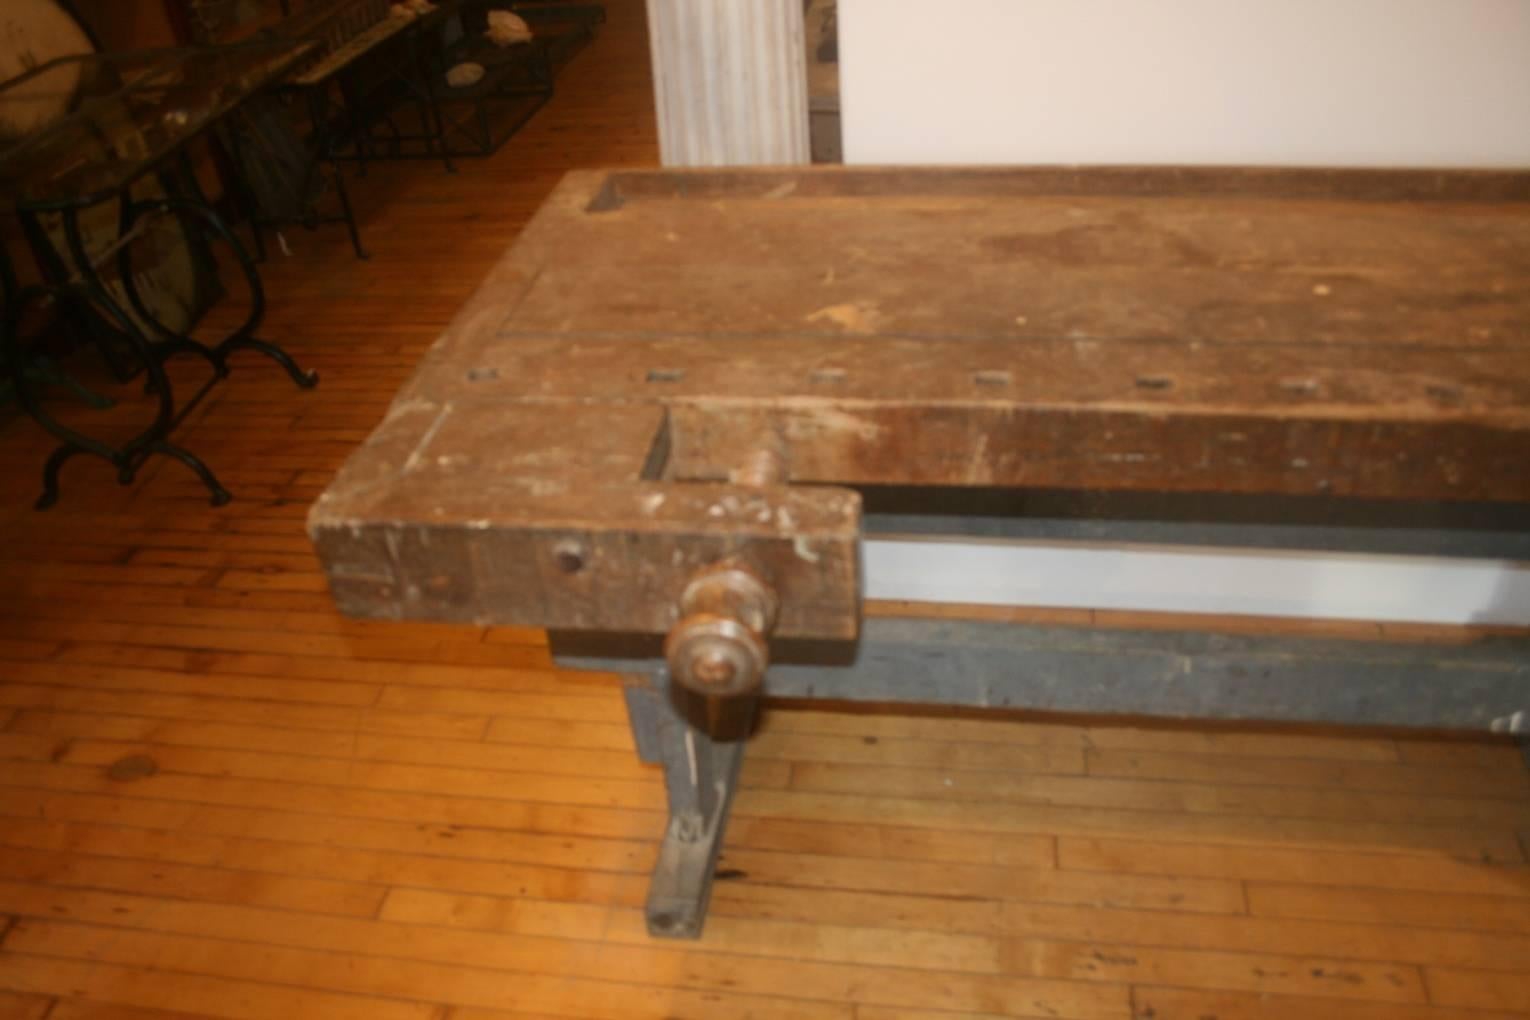 Very early carpenter's Industrial workbench, circa 1780s. Original gray paint on the base and 18th century. Characteristic wedge construction. I've seen a lot of these benches but never one this early. Probably came from an early furniture mill.